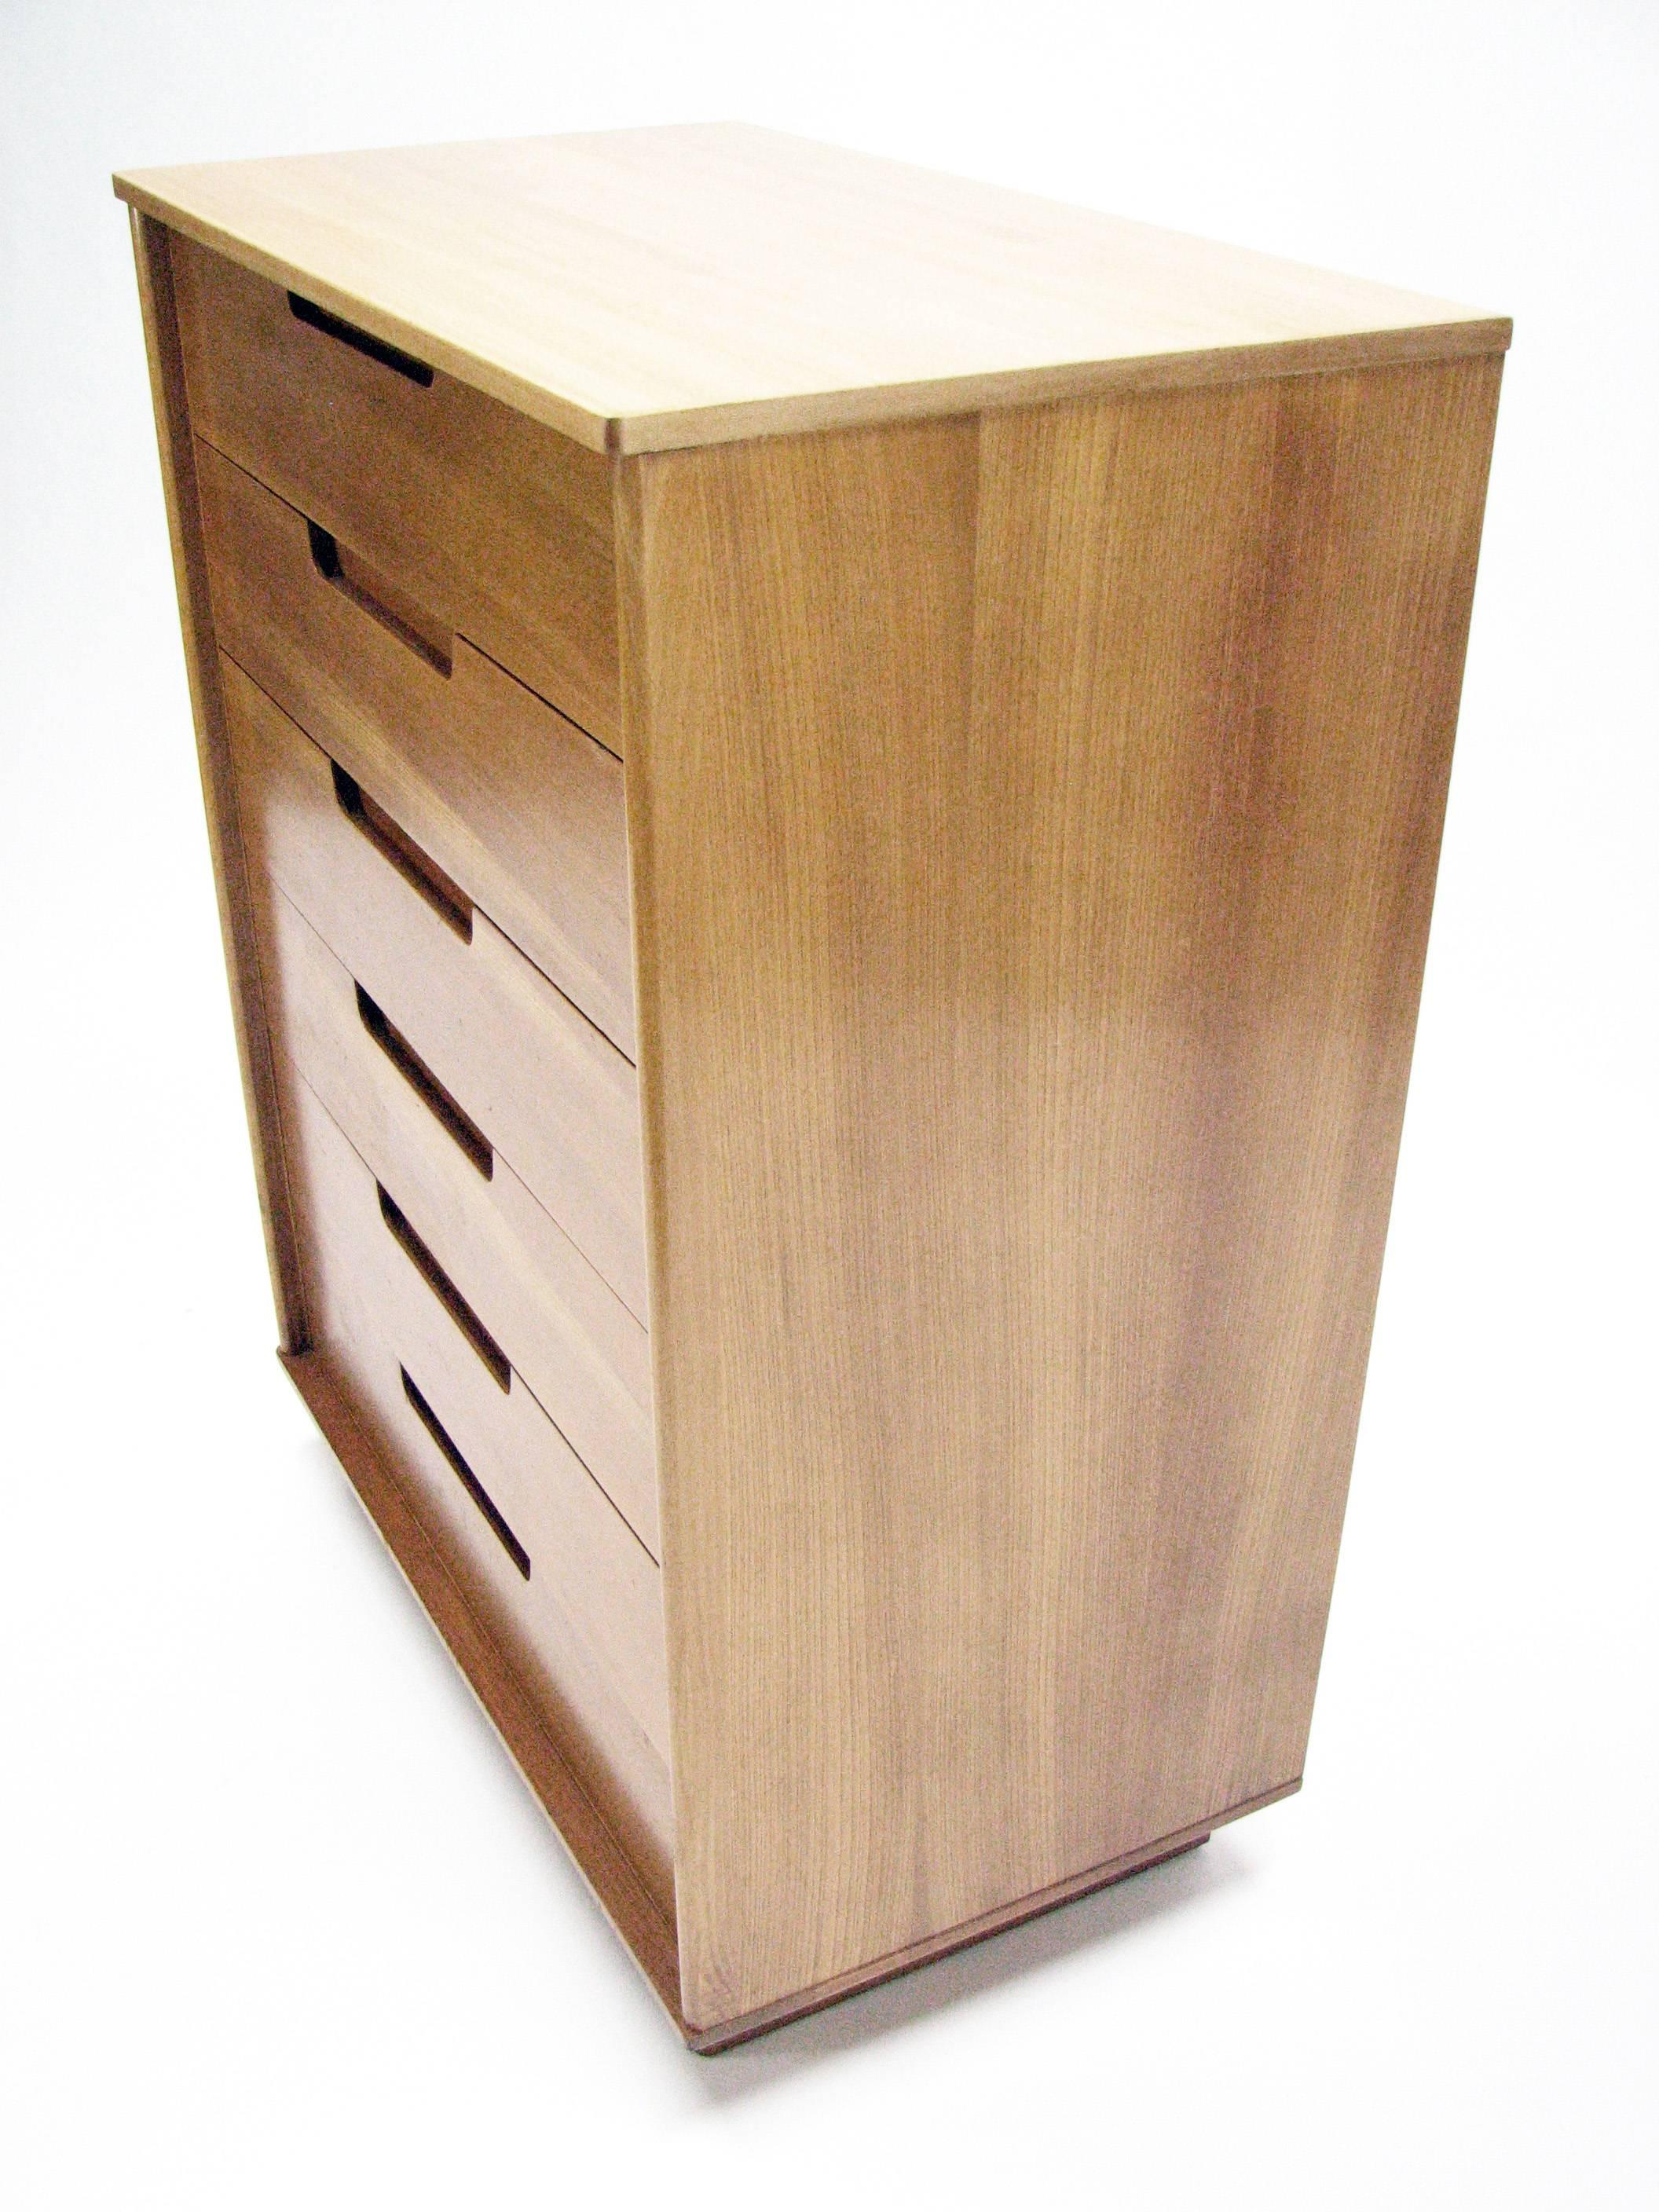 American Mid-Century Chest of Drawers by Milo Baughman for Drexel “Today’s Living”